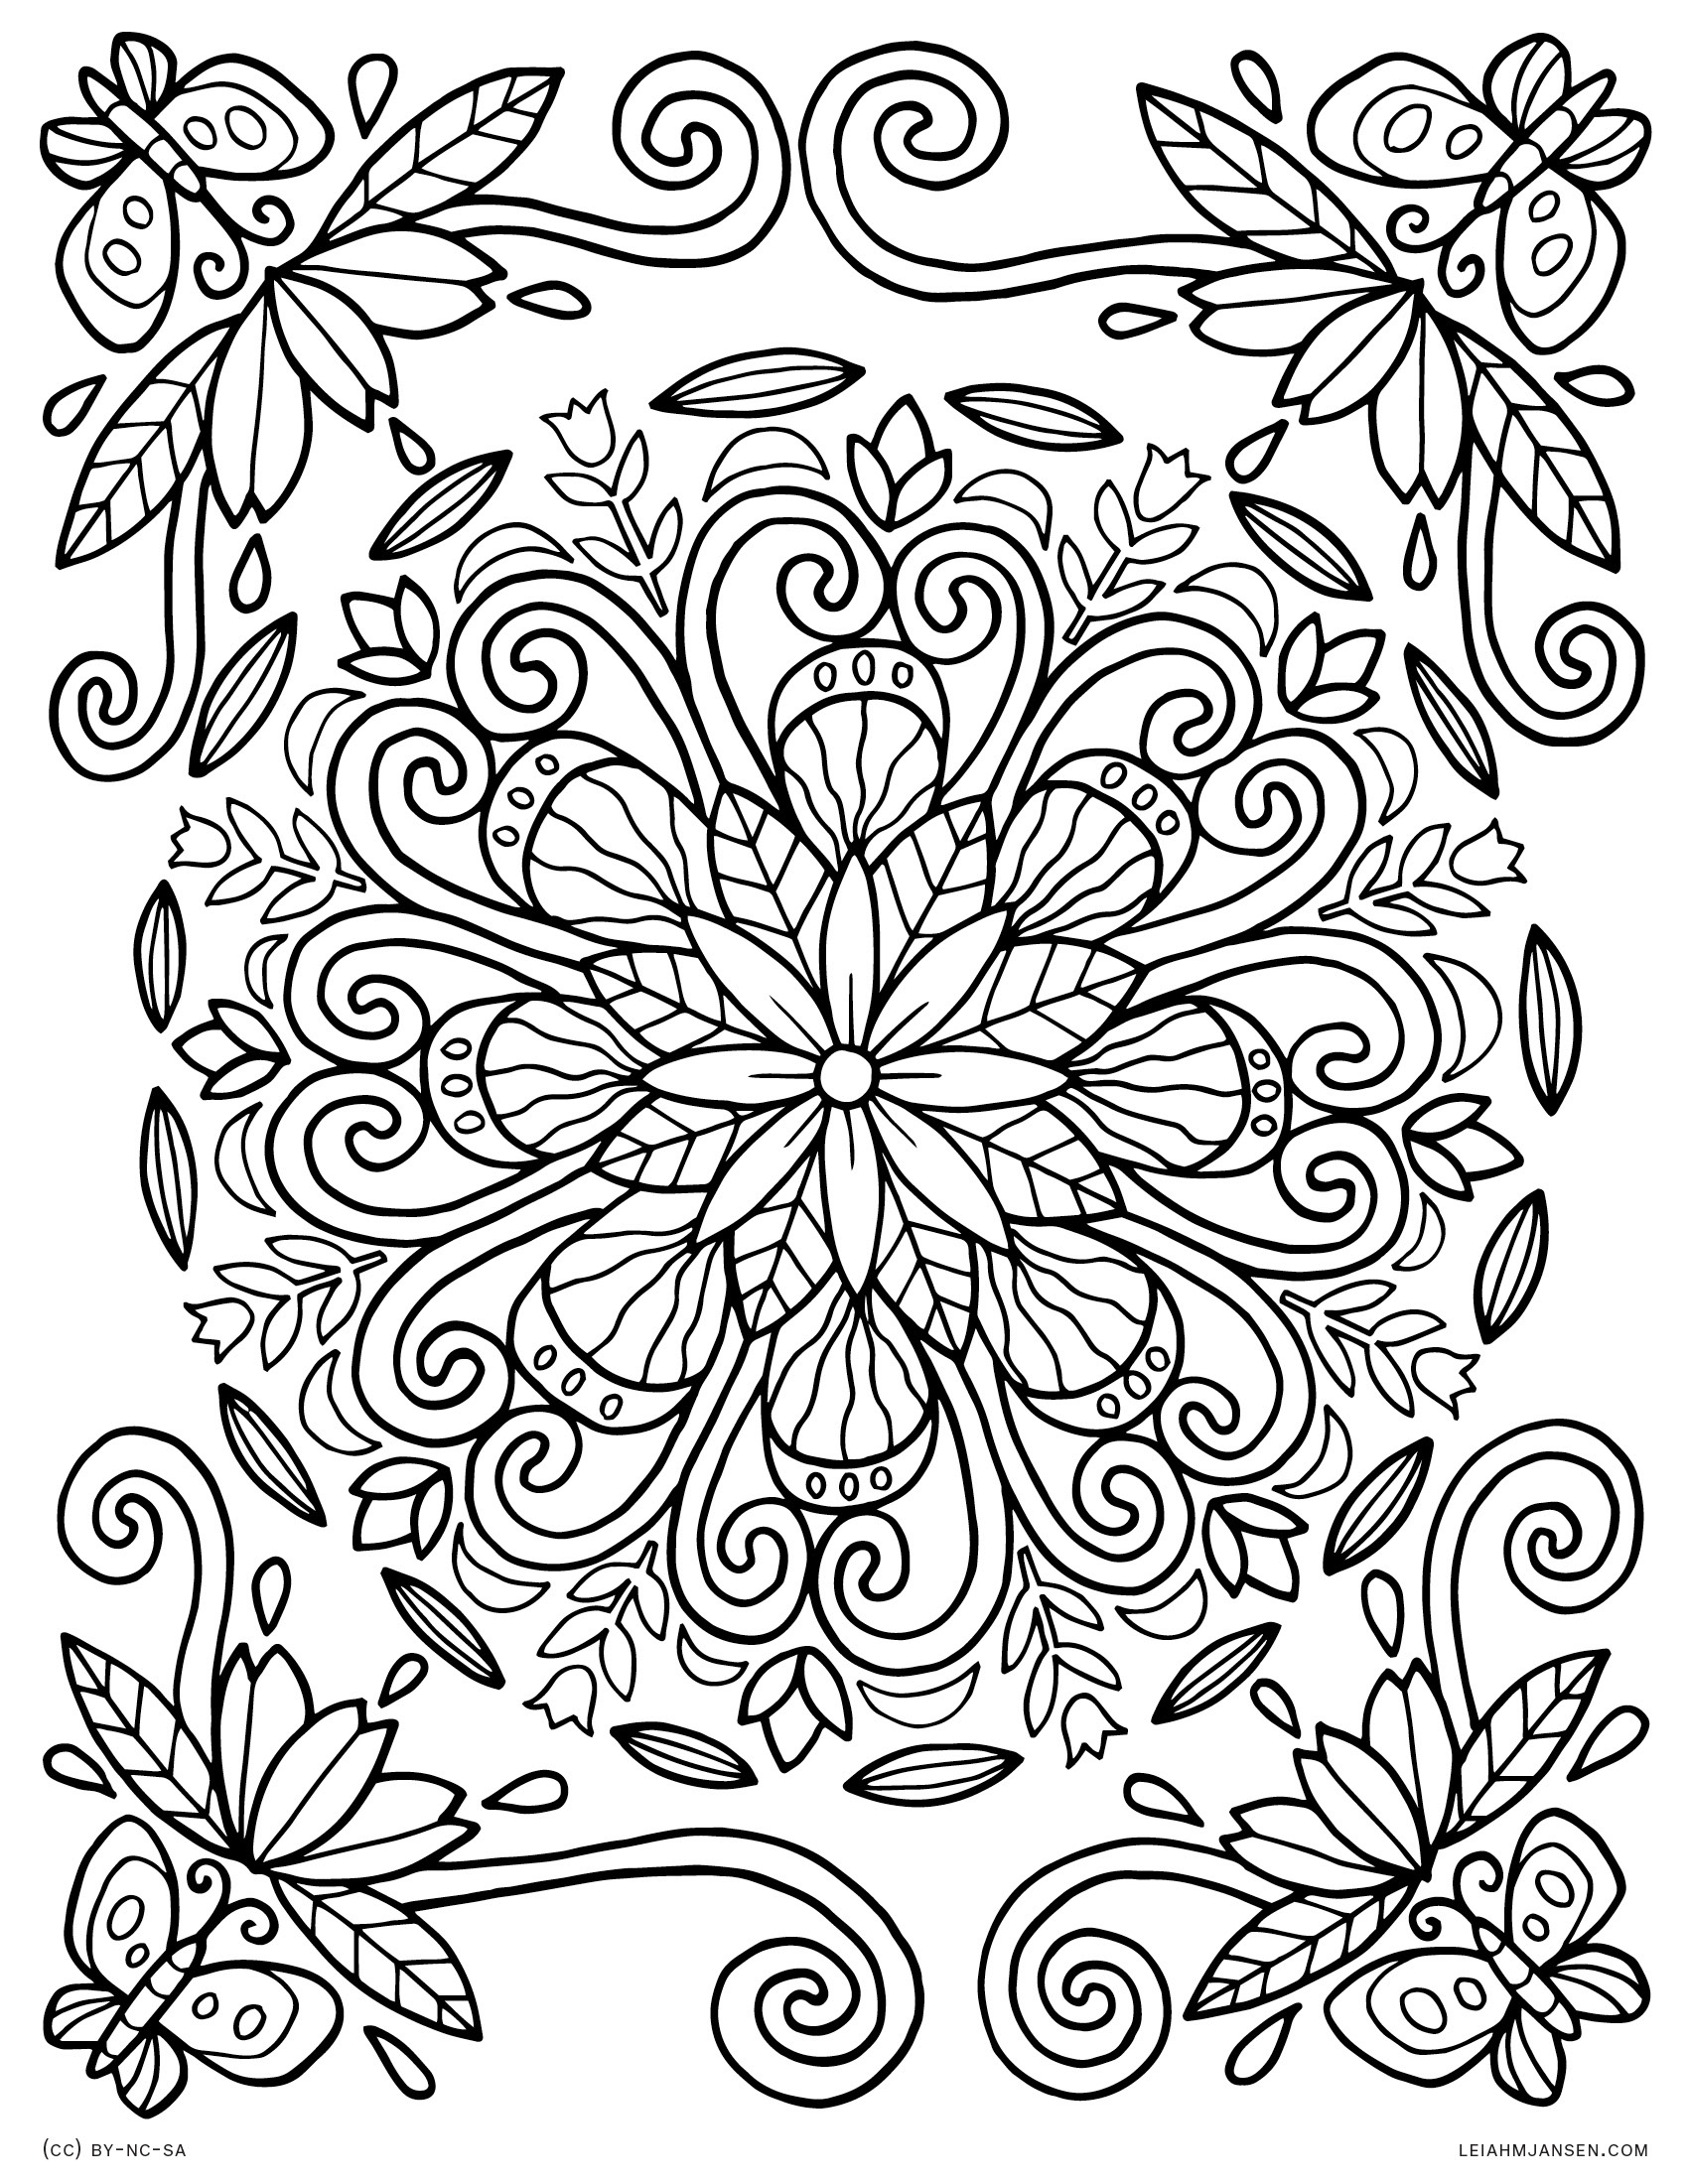 Coloring Pages - Free Printable Spring Pictures To Color